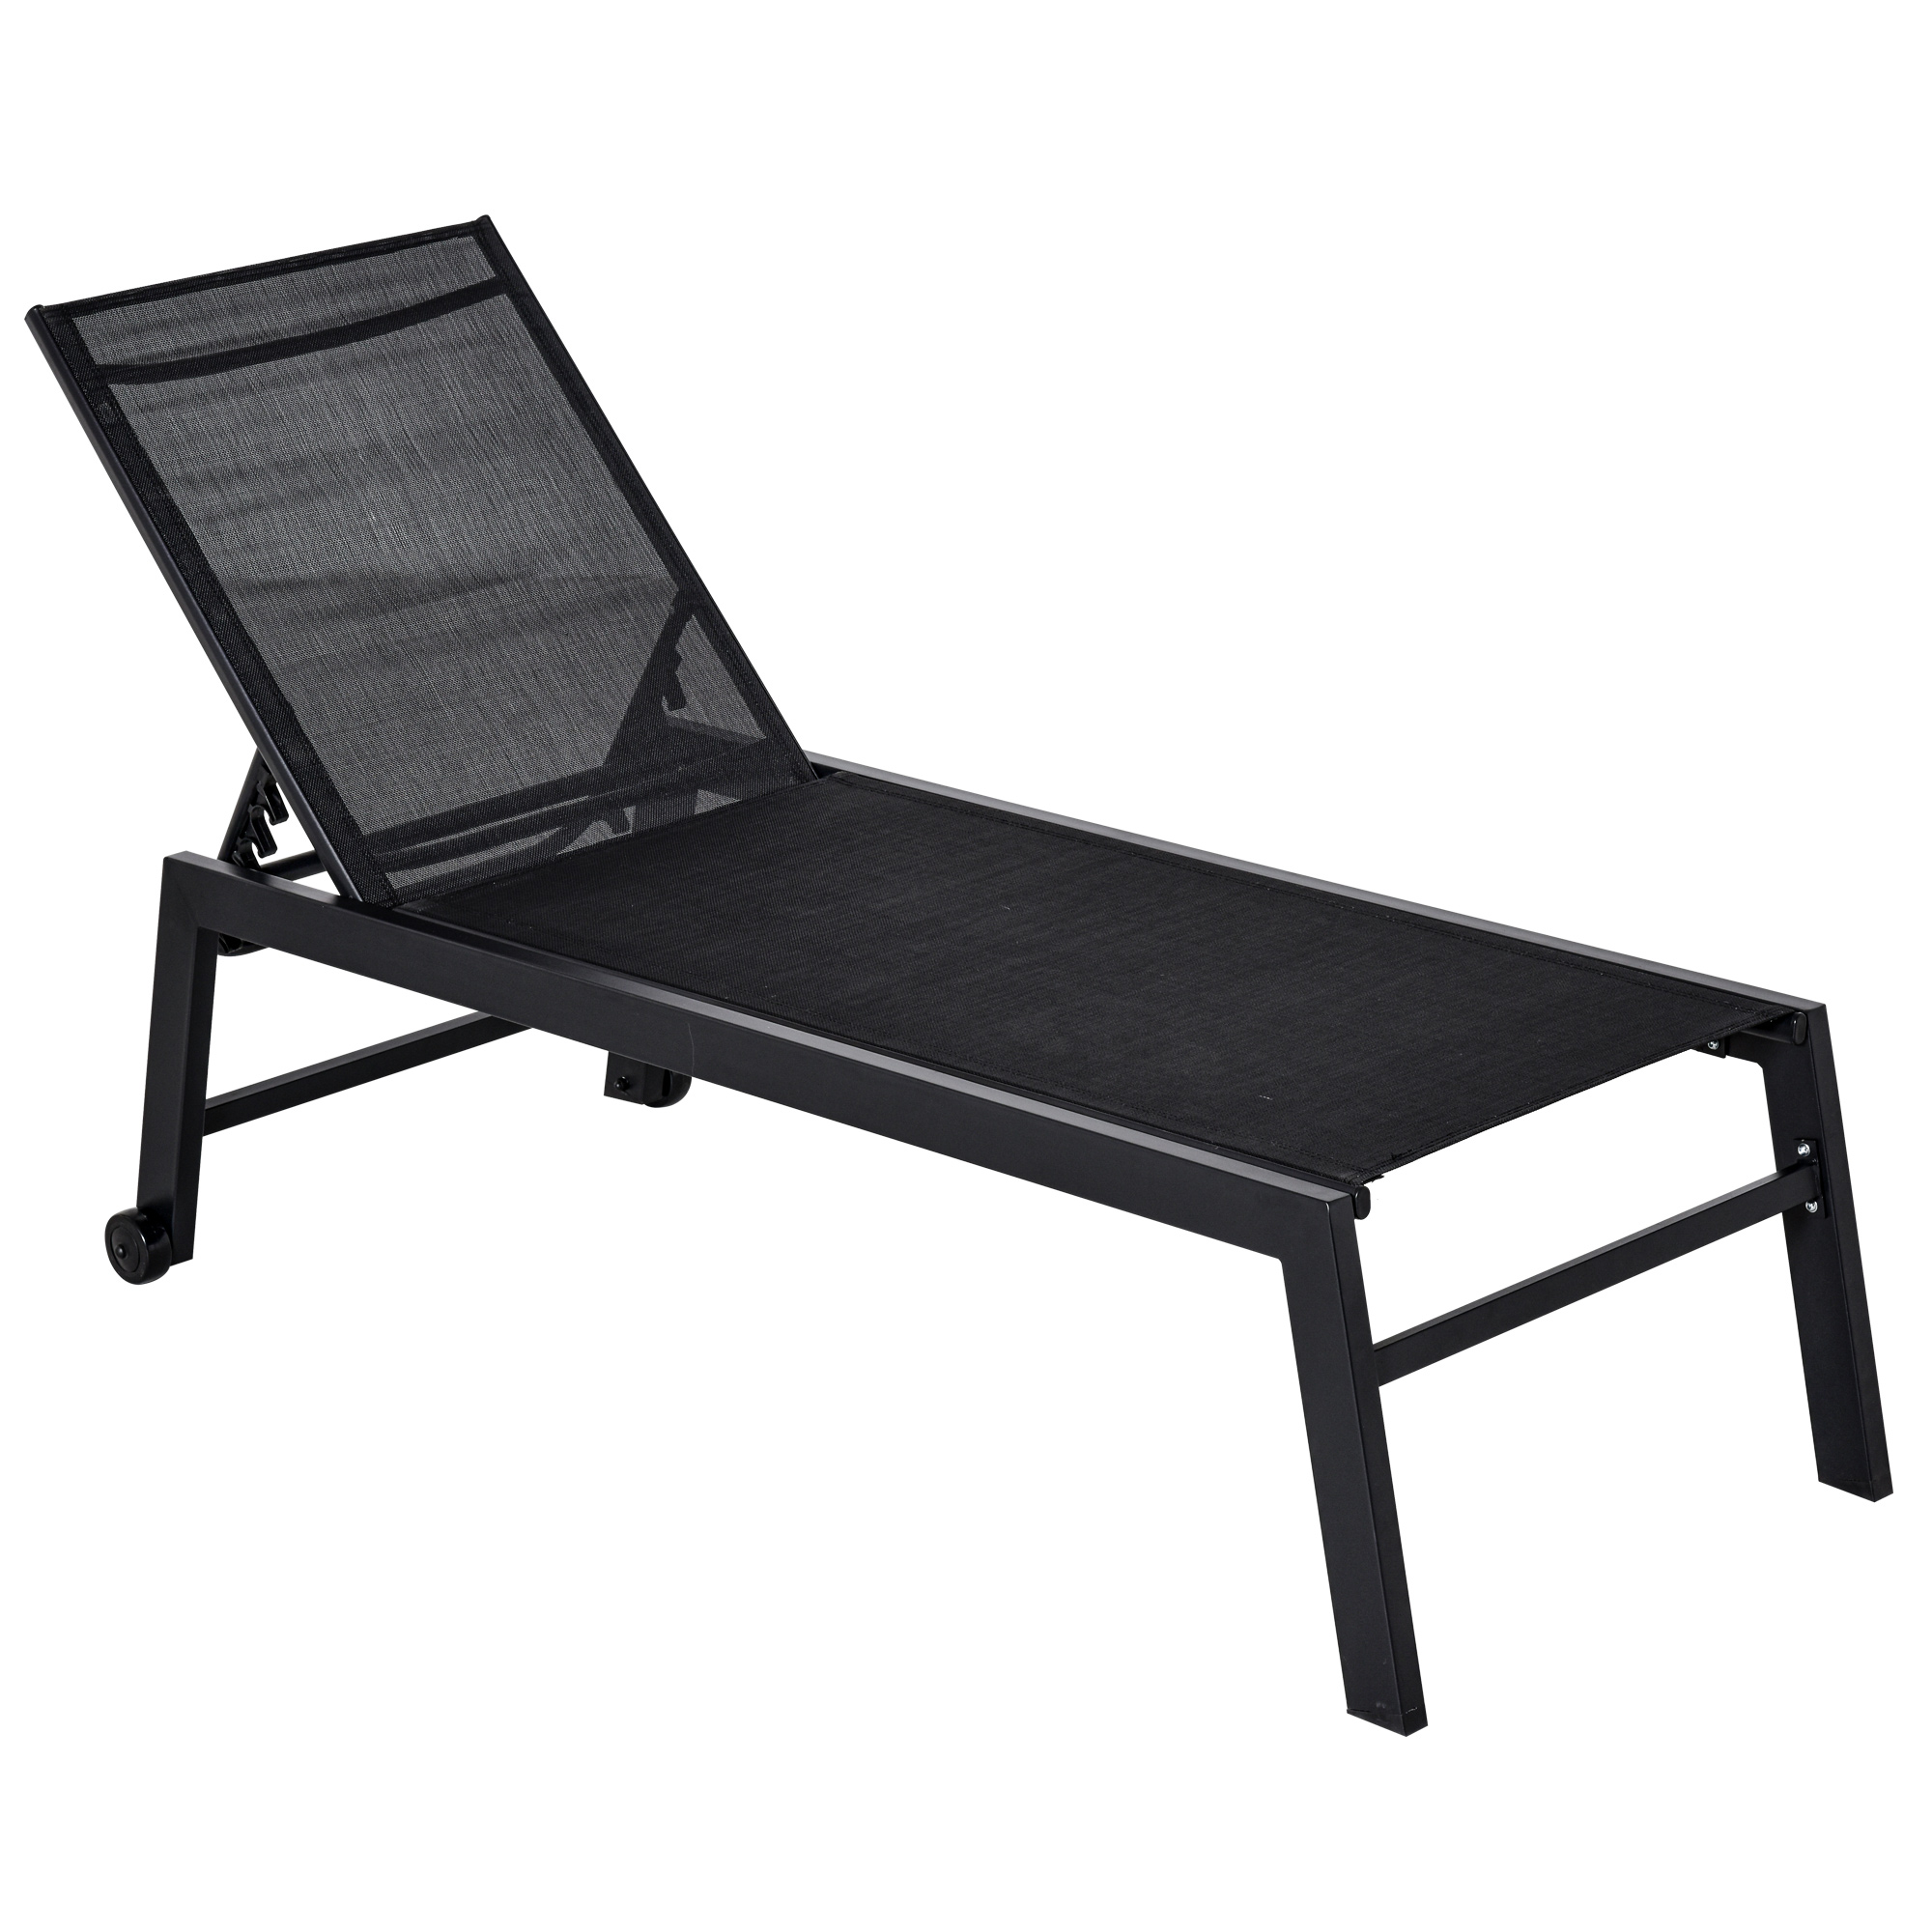 Outsunny Patio Chaise Lounge Chair with 5-Position Backrest, Black - image 1 of 9